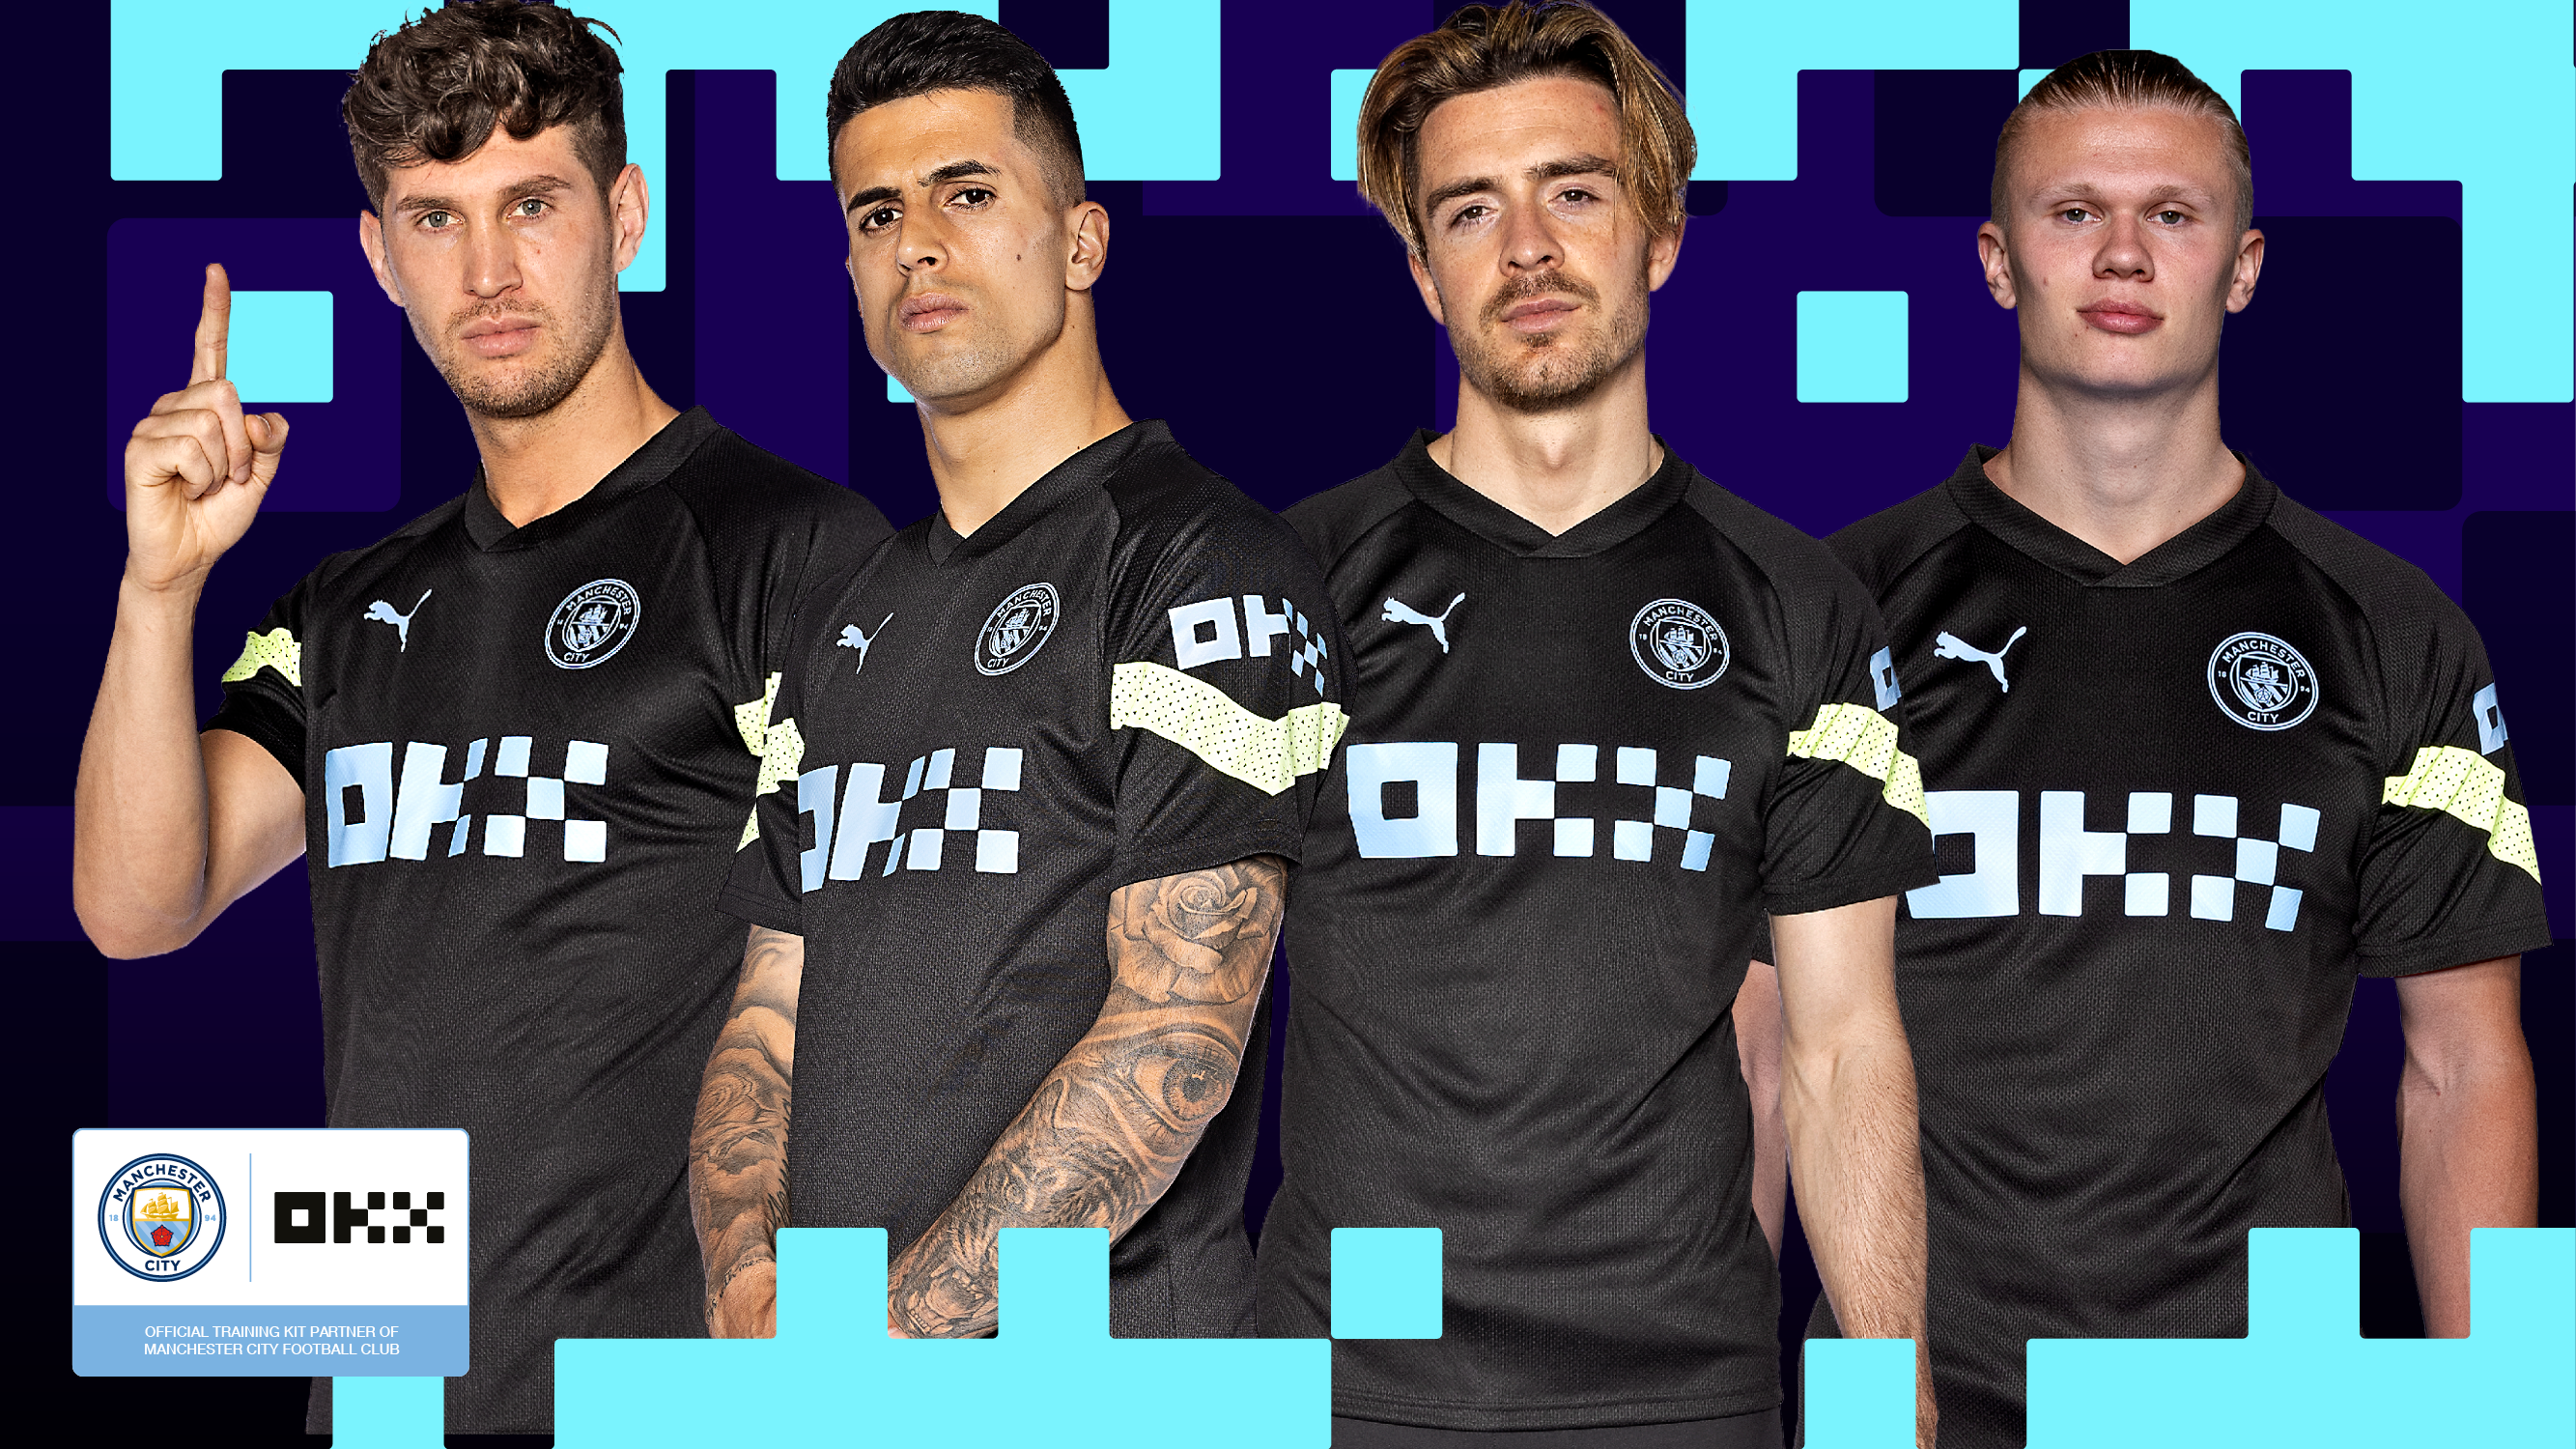 Manchester City have named OKX as their new training kit partner (Manchester City handout)